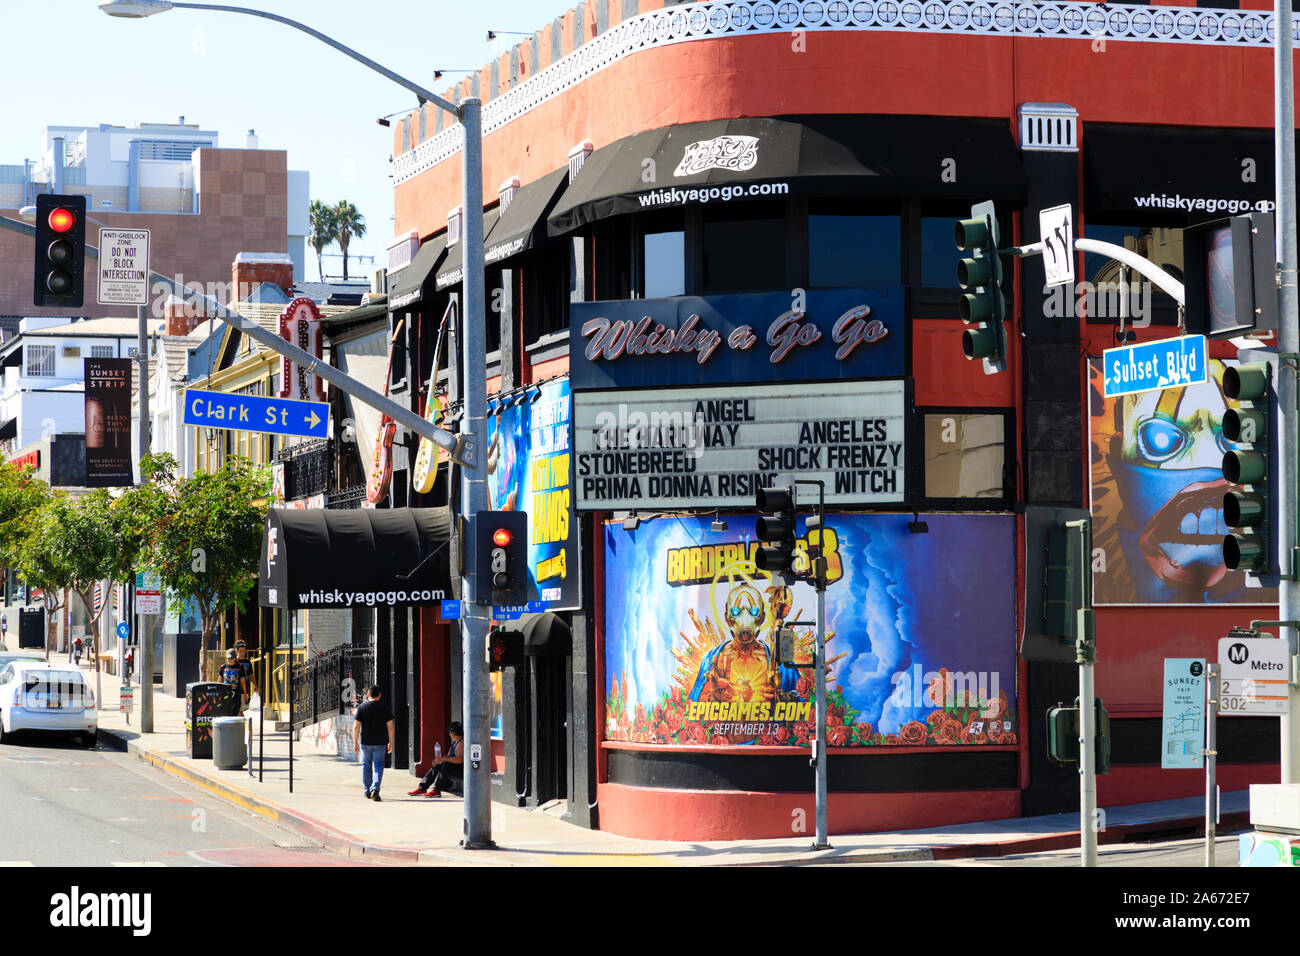 The Whisky a Go Go nightclub on Sunset Boulevard, Sunset Strip, West Hollywood, Los Angeles, California, United States of America. October 2019 Stock Photo